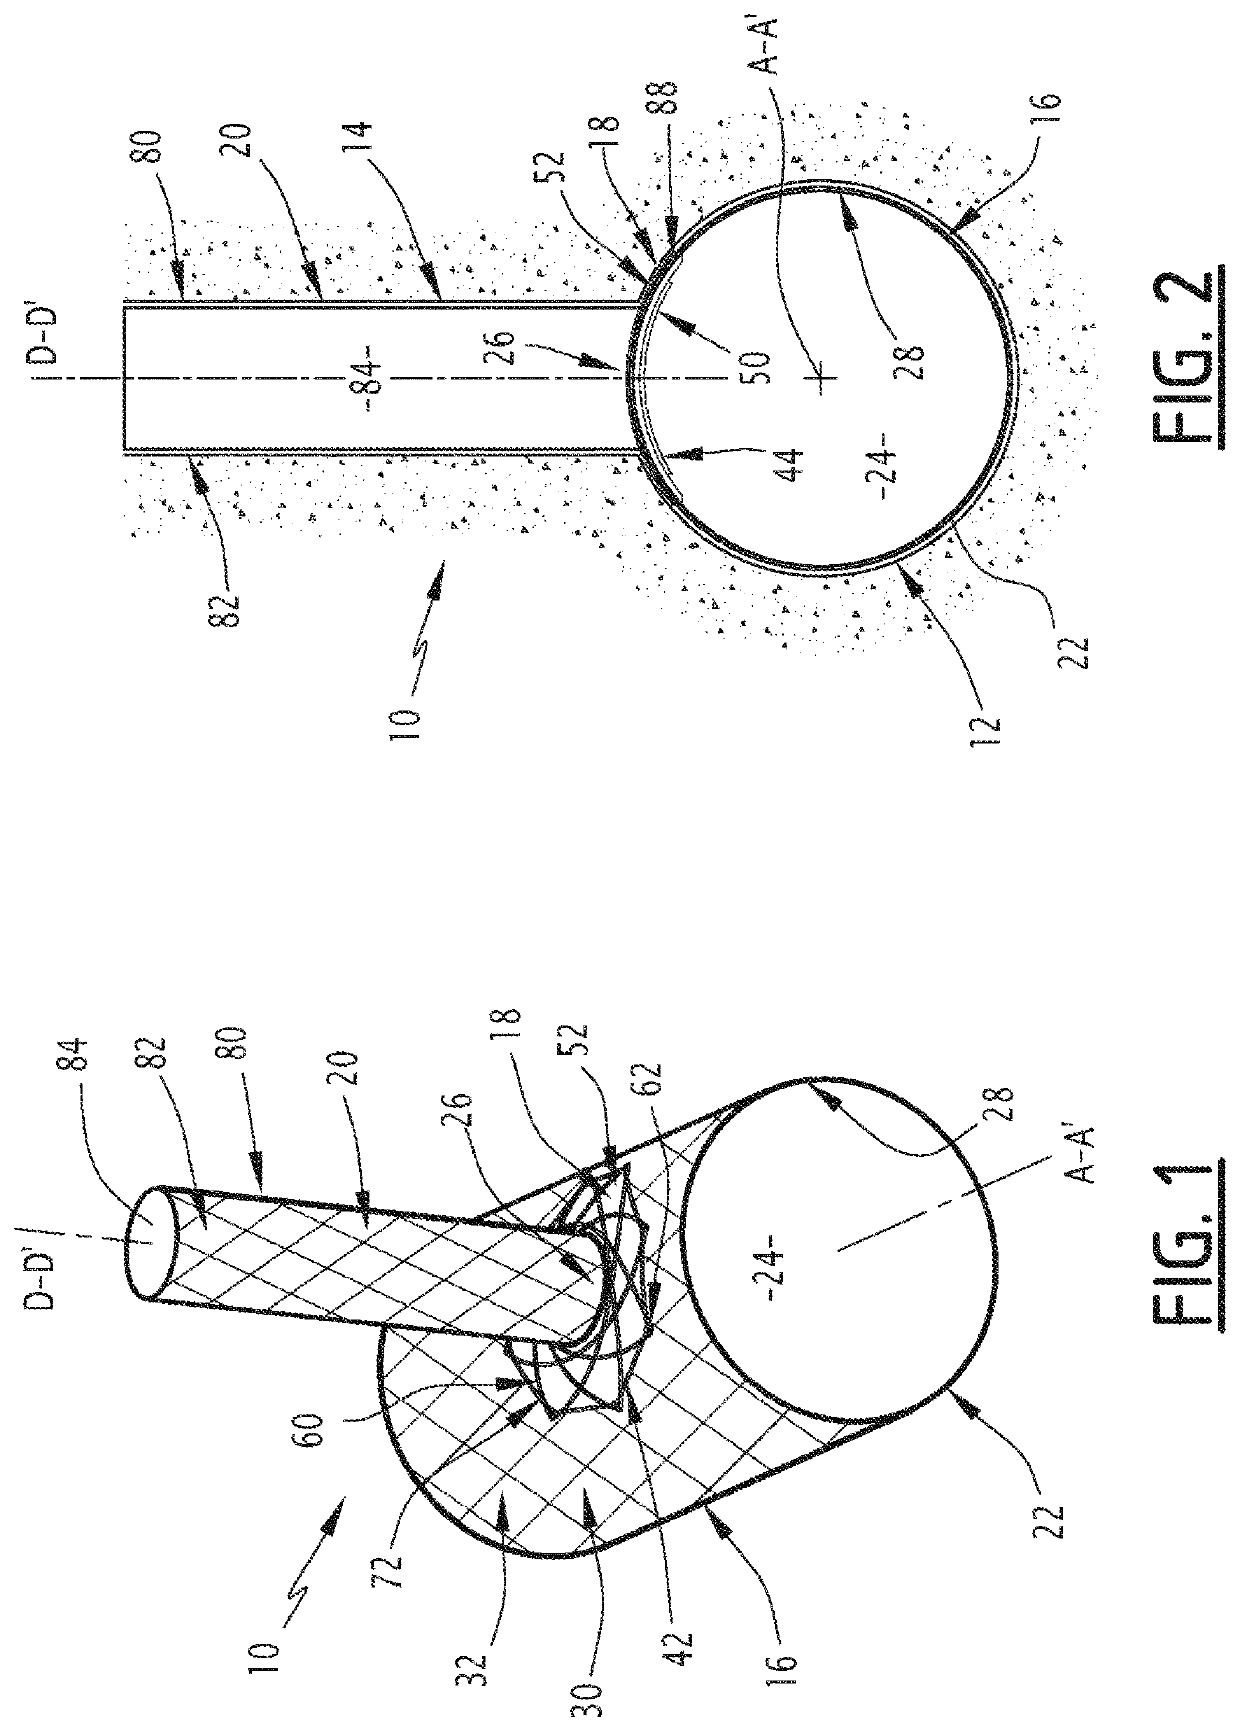 Elastic ring and associated treatment device for implanting in a conduit for circulation of a body fluid